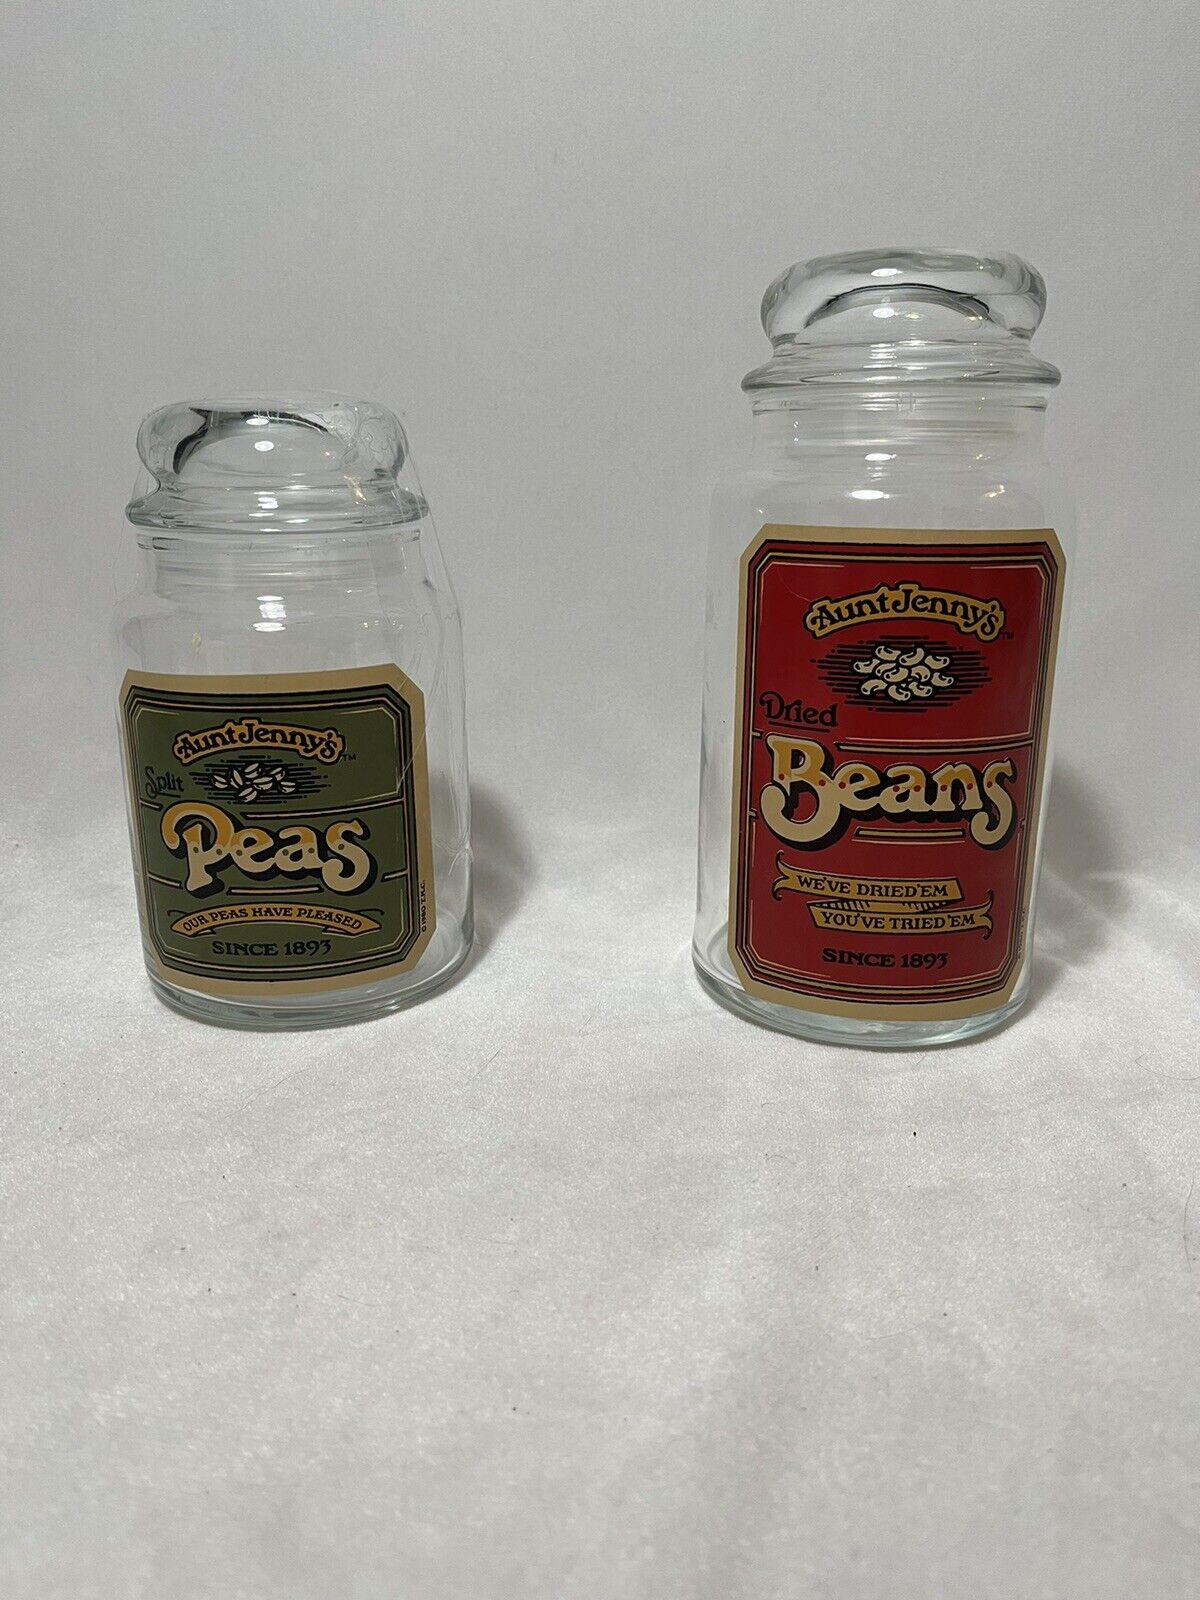 VTG 1980’s Aunt Jenny’s Split Peas and Dried Bean Canister Jars (2) Made in USA